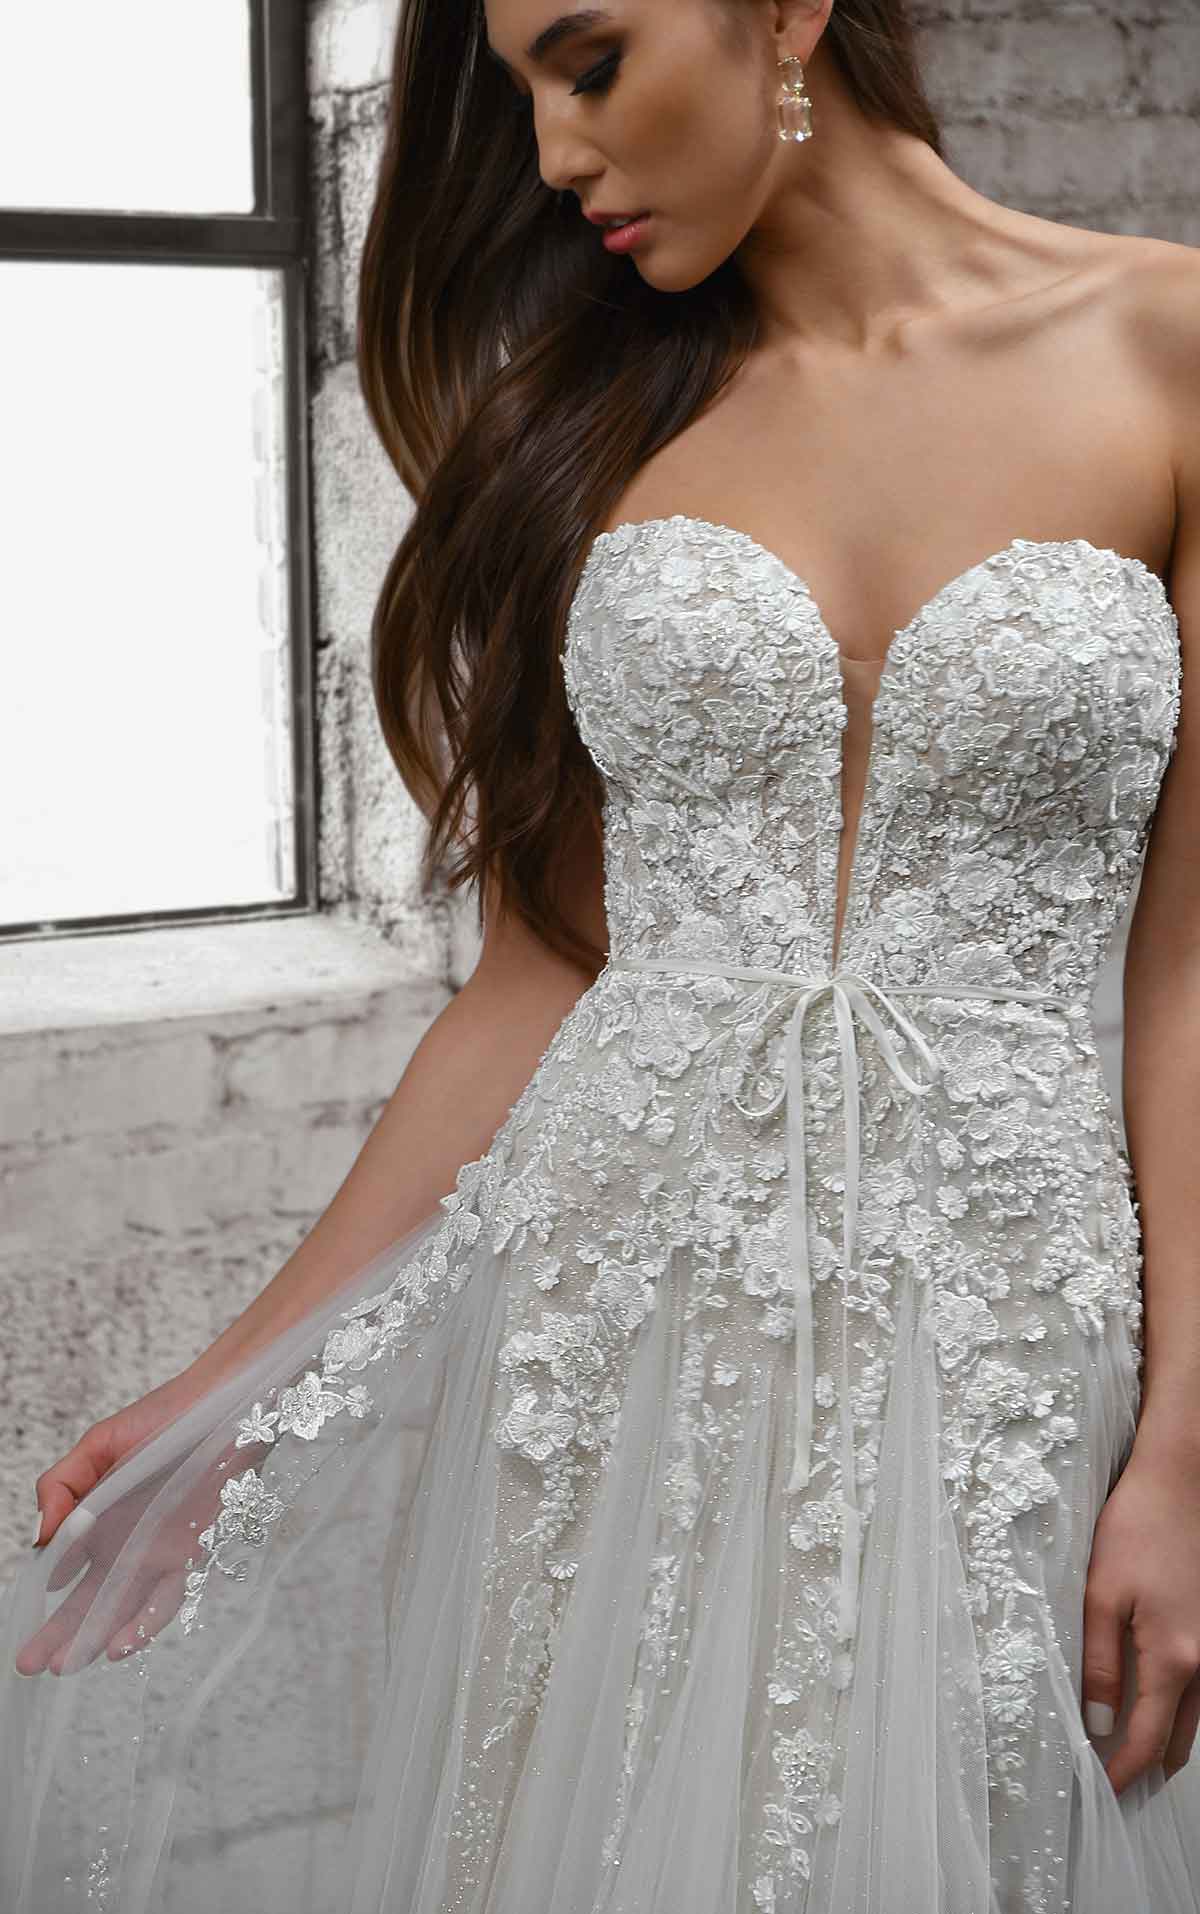 1358 Romantic Sweetheart Neckline Wedding Dress with Floral Details by Martina Liana